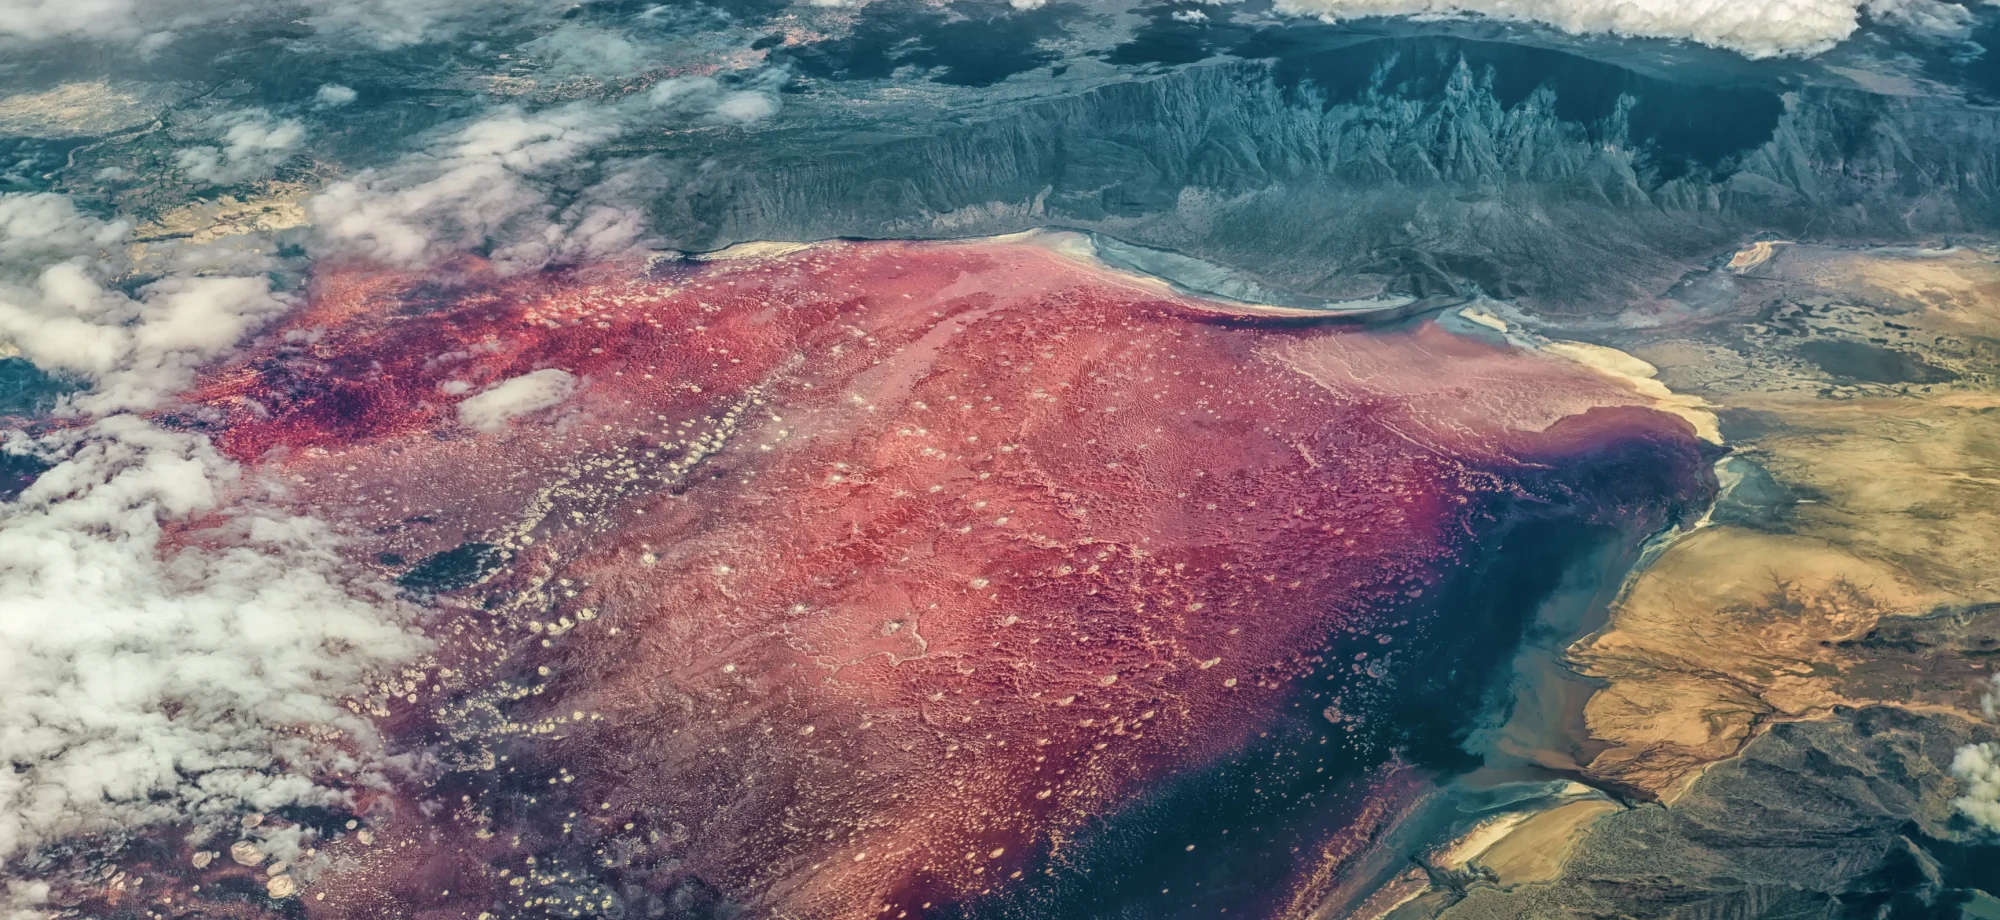 Lake Natron sparkles in a deep red colour, contrasting its rocky banks.